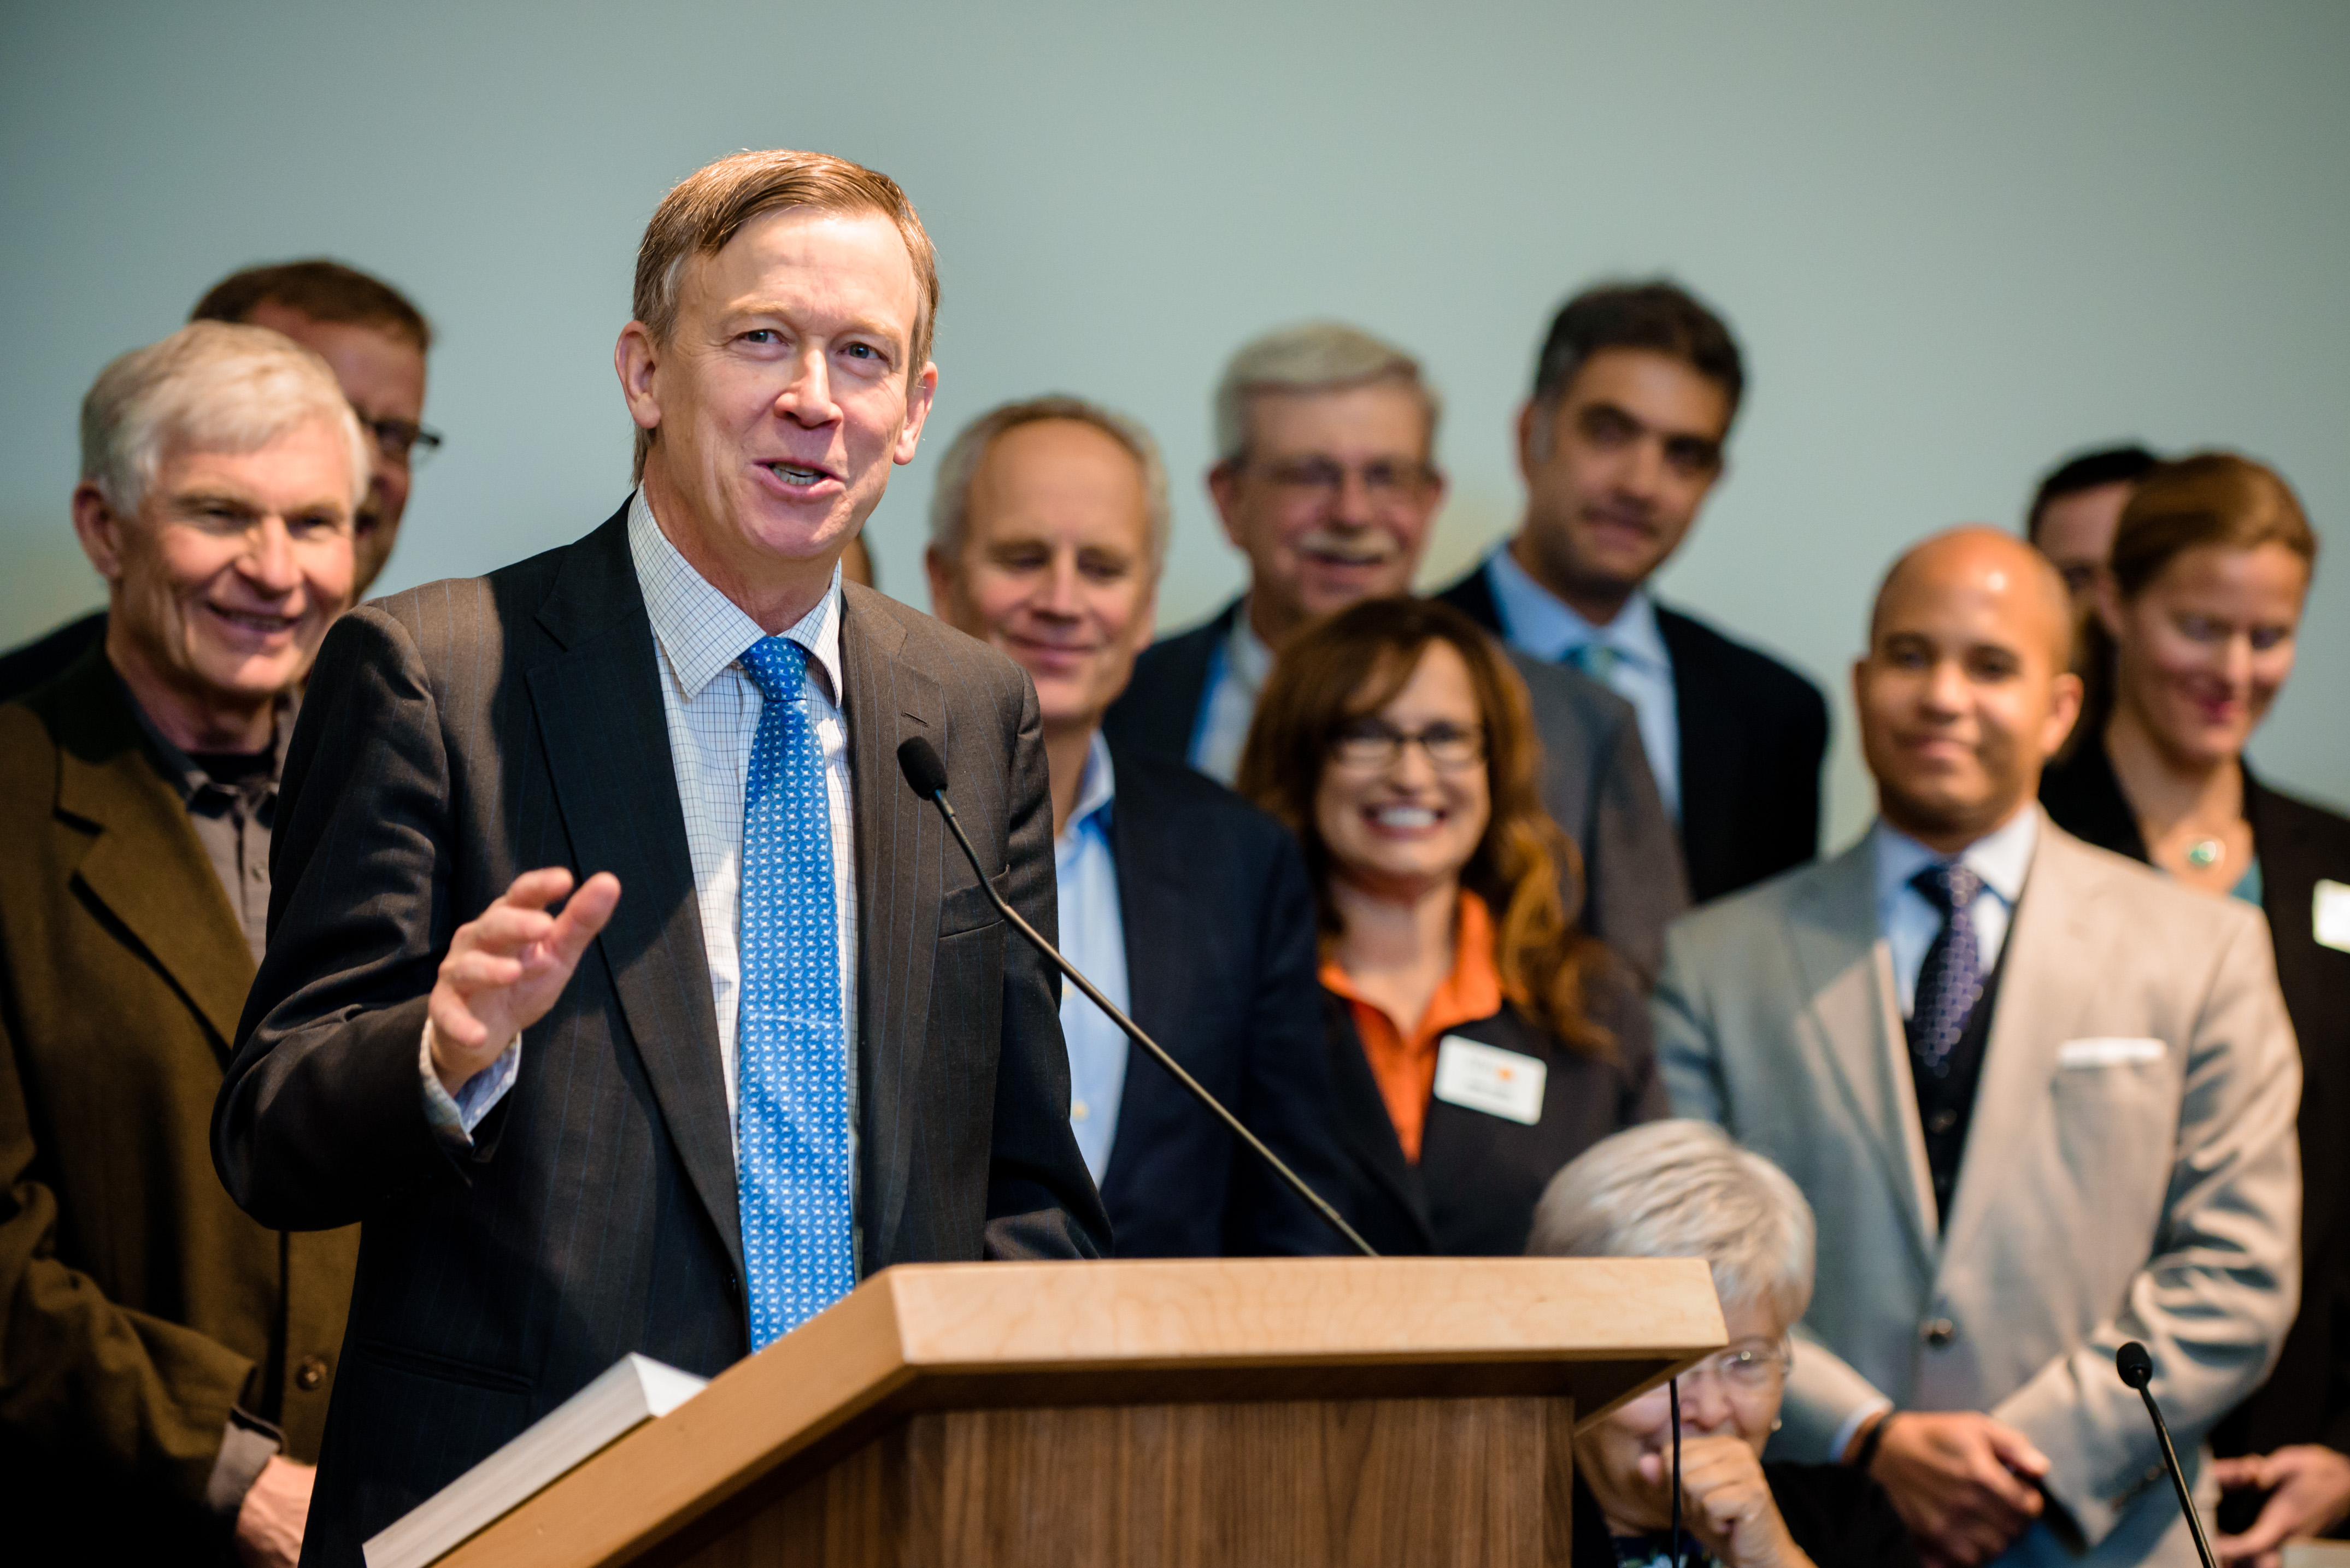 Colorado Gov. John Hickenlooper standing at a podium surrounded by smiling people.